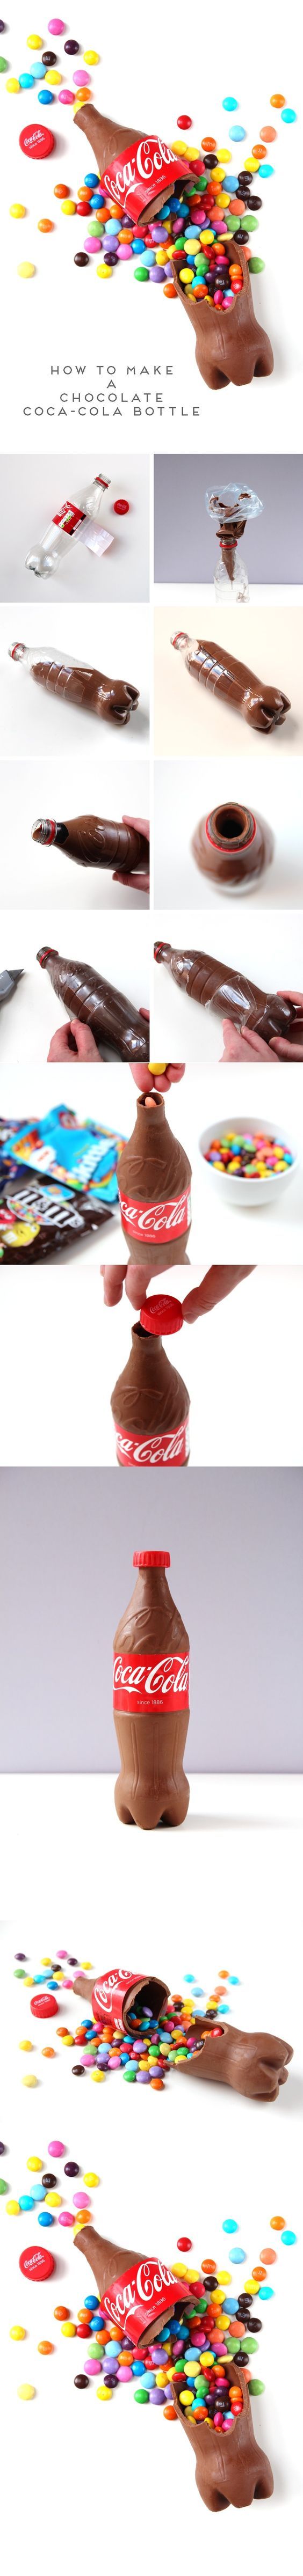 Sweet Filled Chocolate Coca Cola Bottle. 